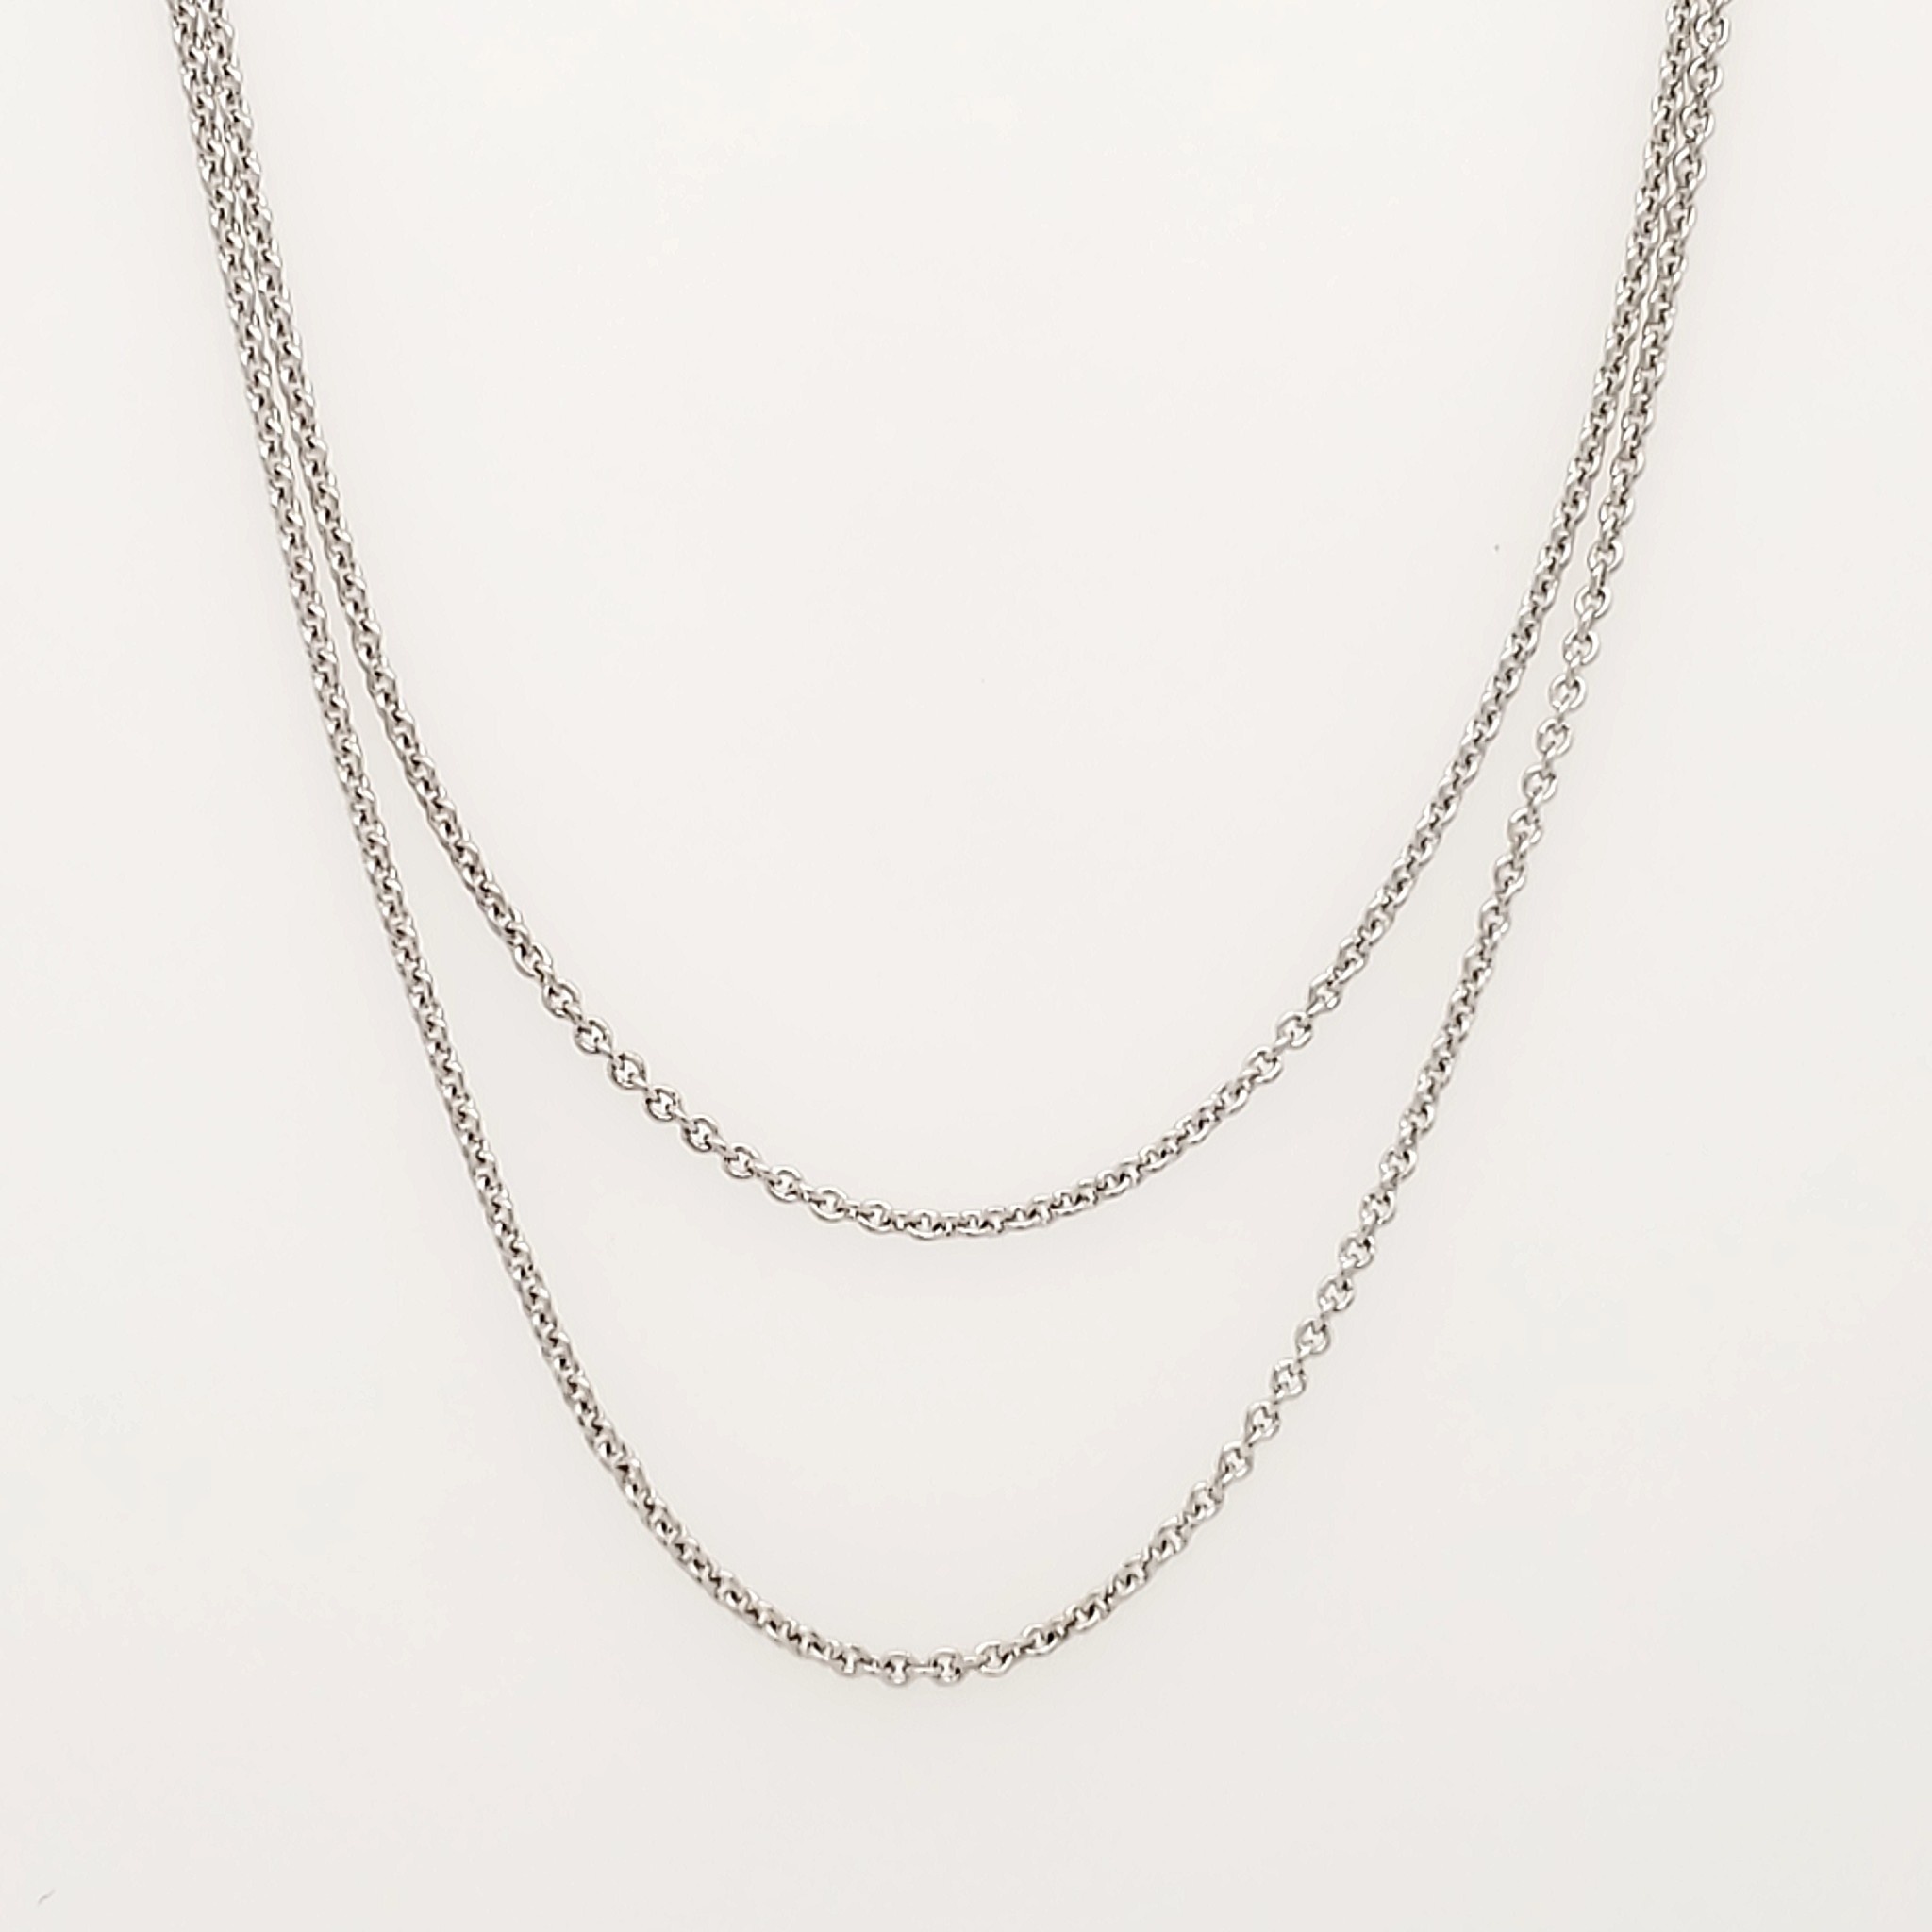 50188 14k White Gold 18" Double Cable Link Chain